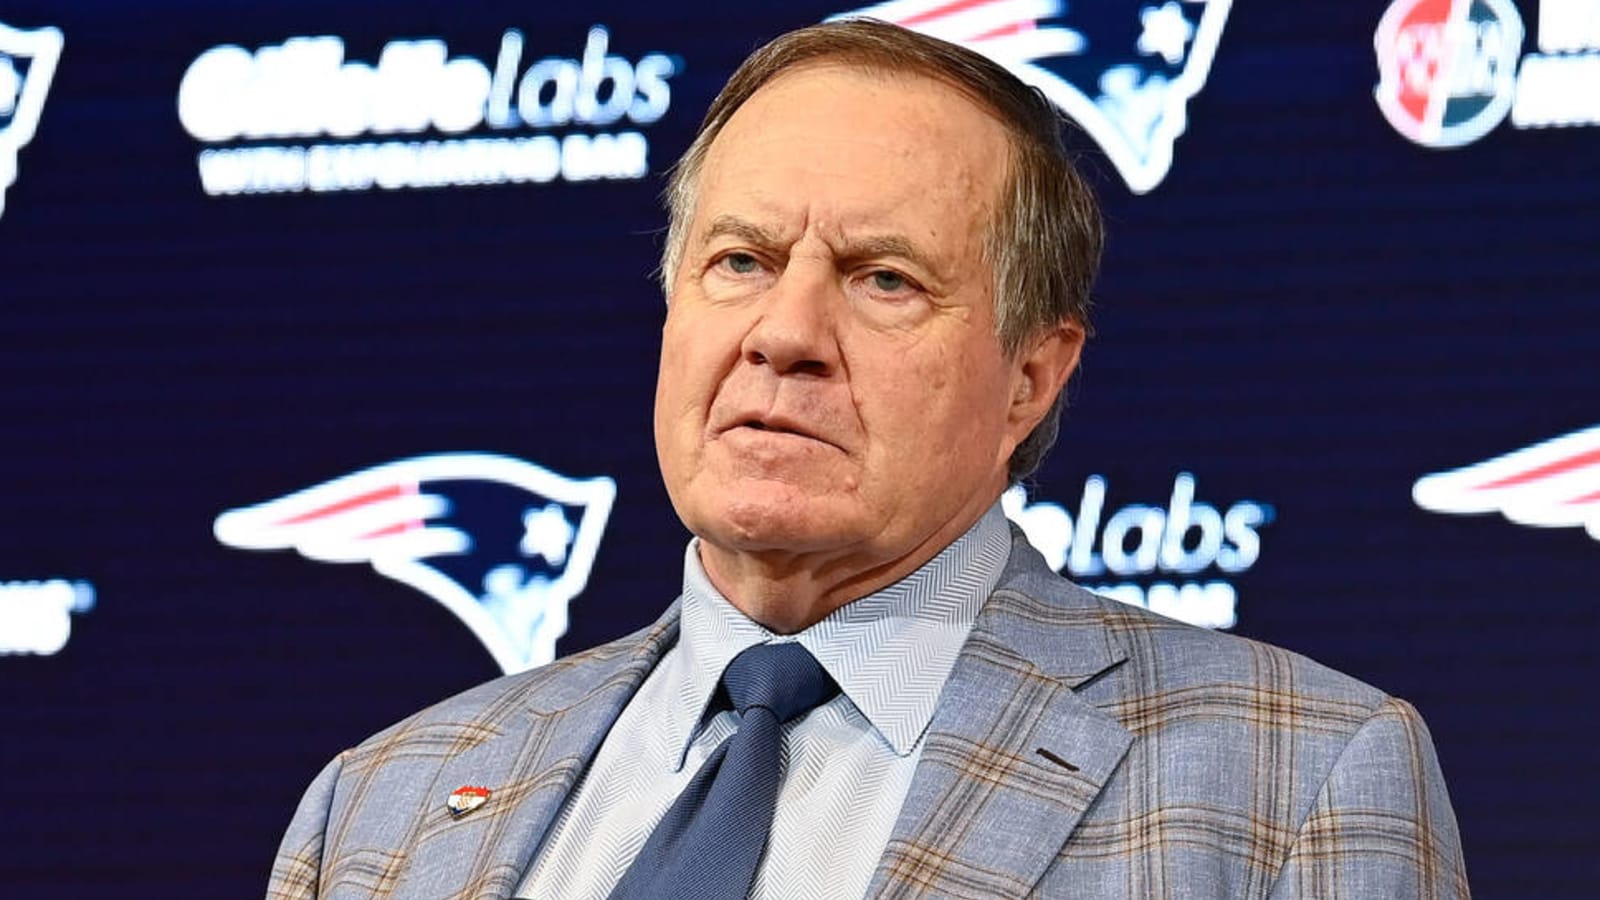 Is a rested, roasted Bill Belichick on the menu in Dallas?